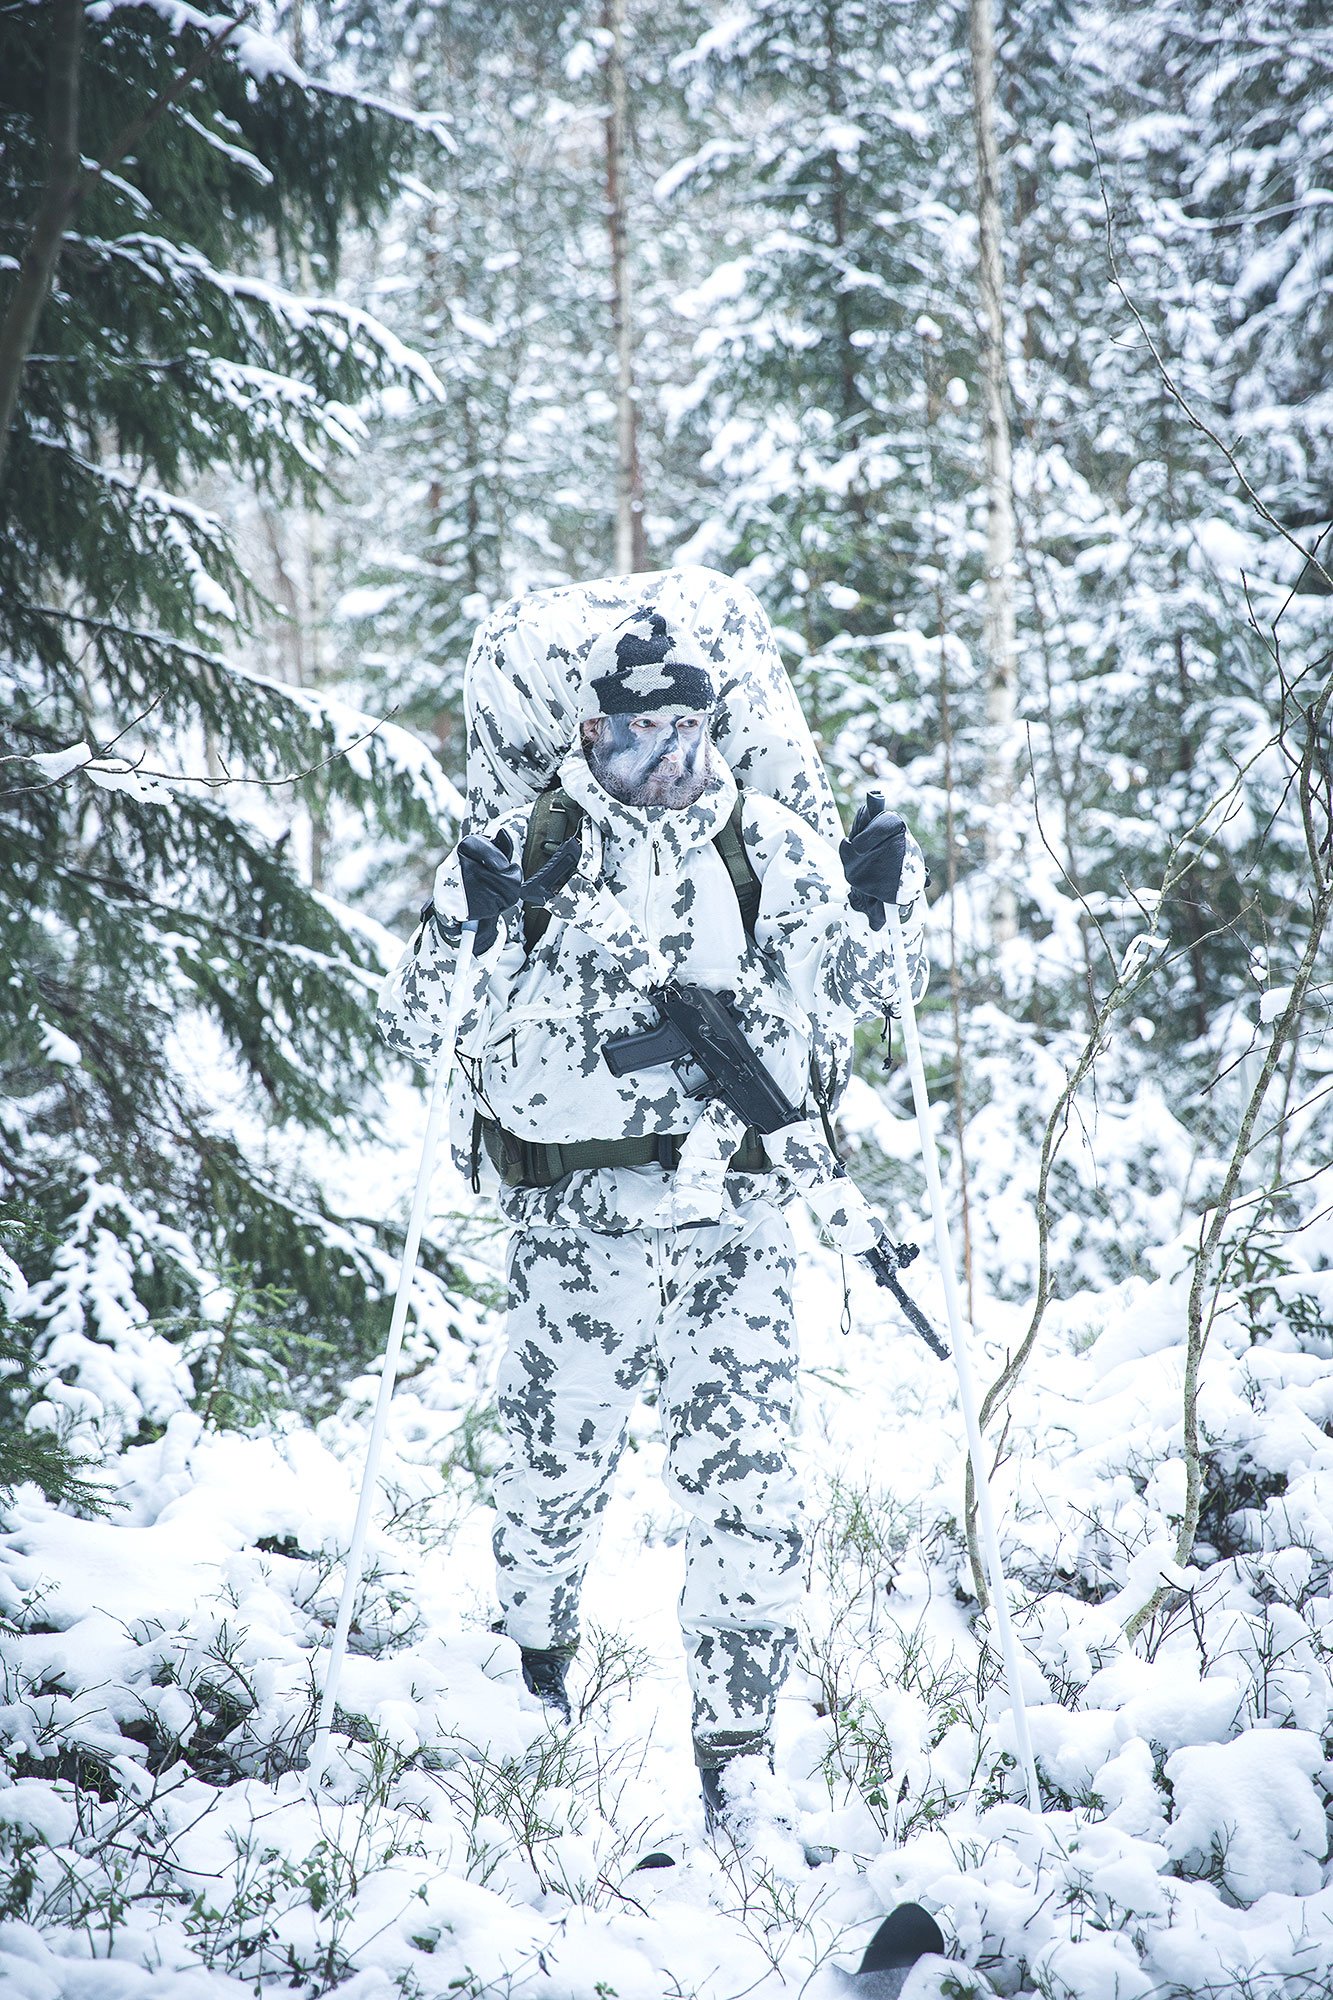 Fully snow camouflaged soldier skiing